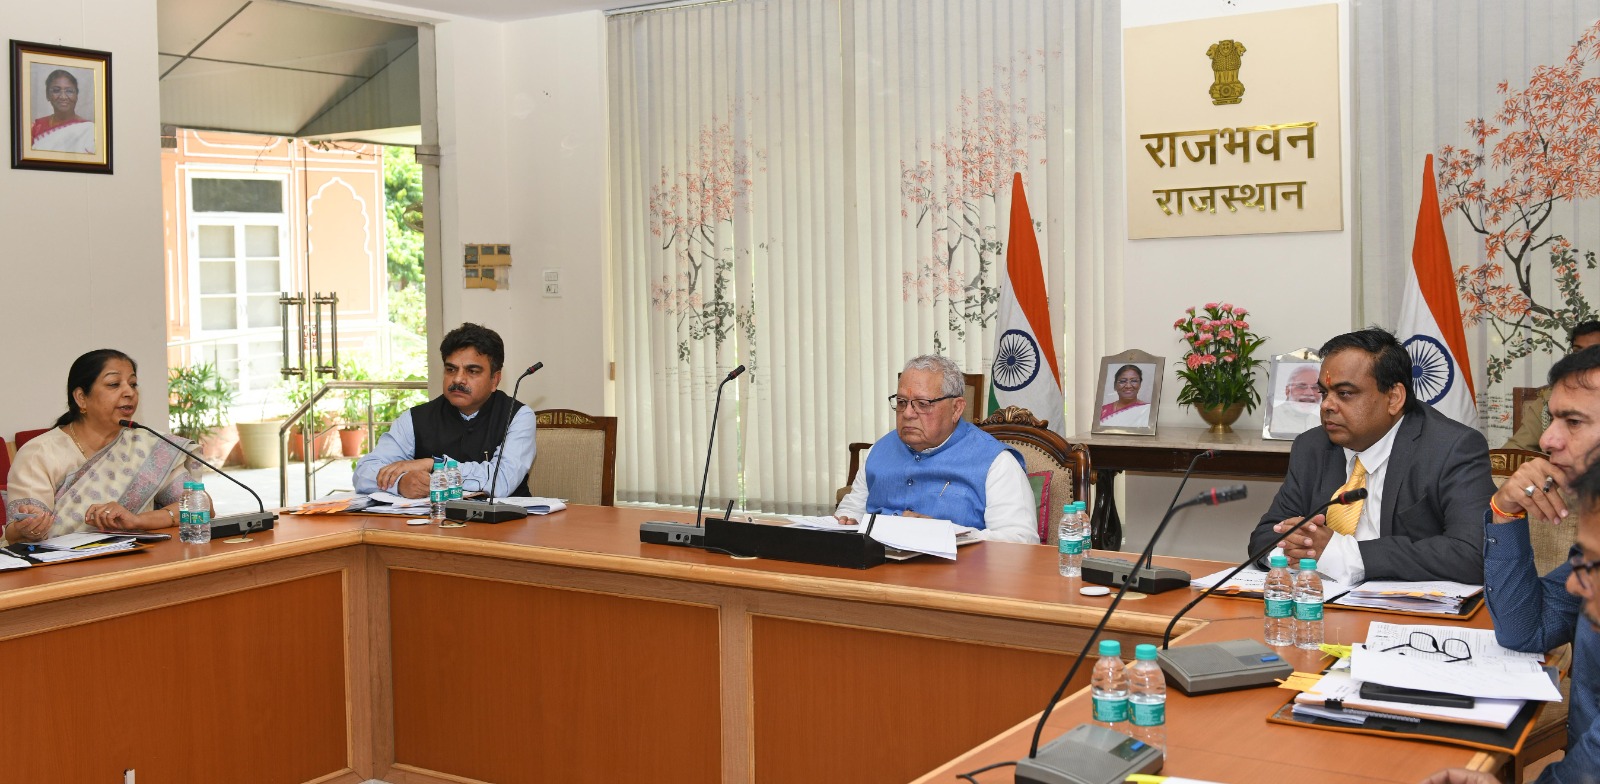 Hon'ble Governor has chaired special meeting of WZCC at Raj Bhawan.